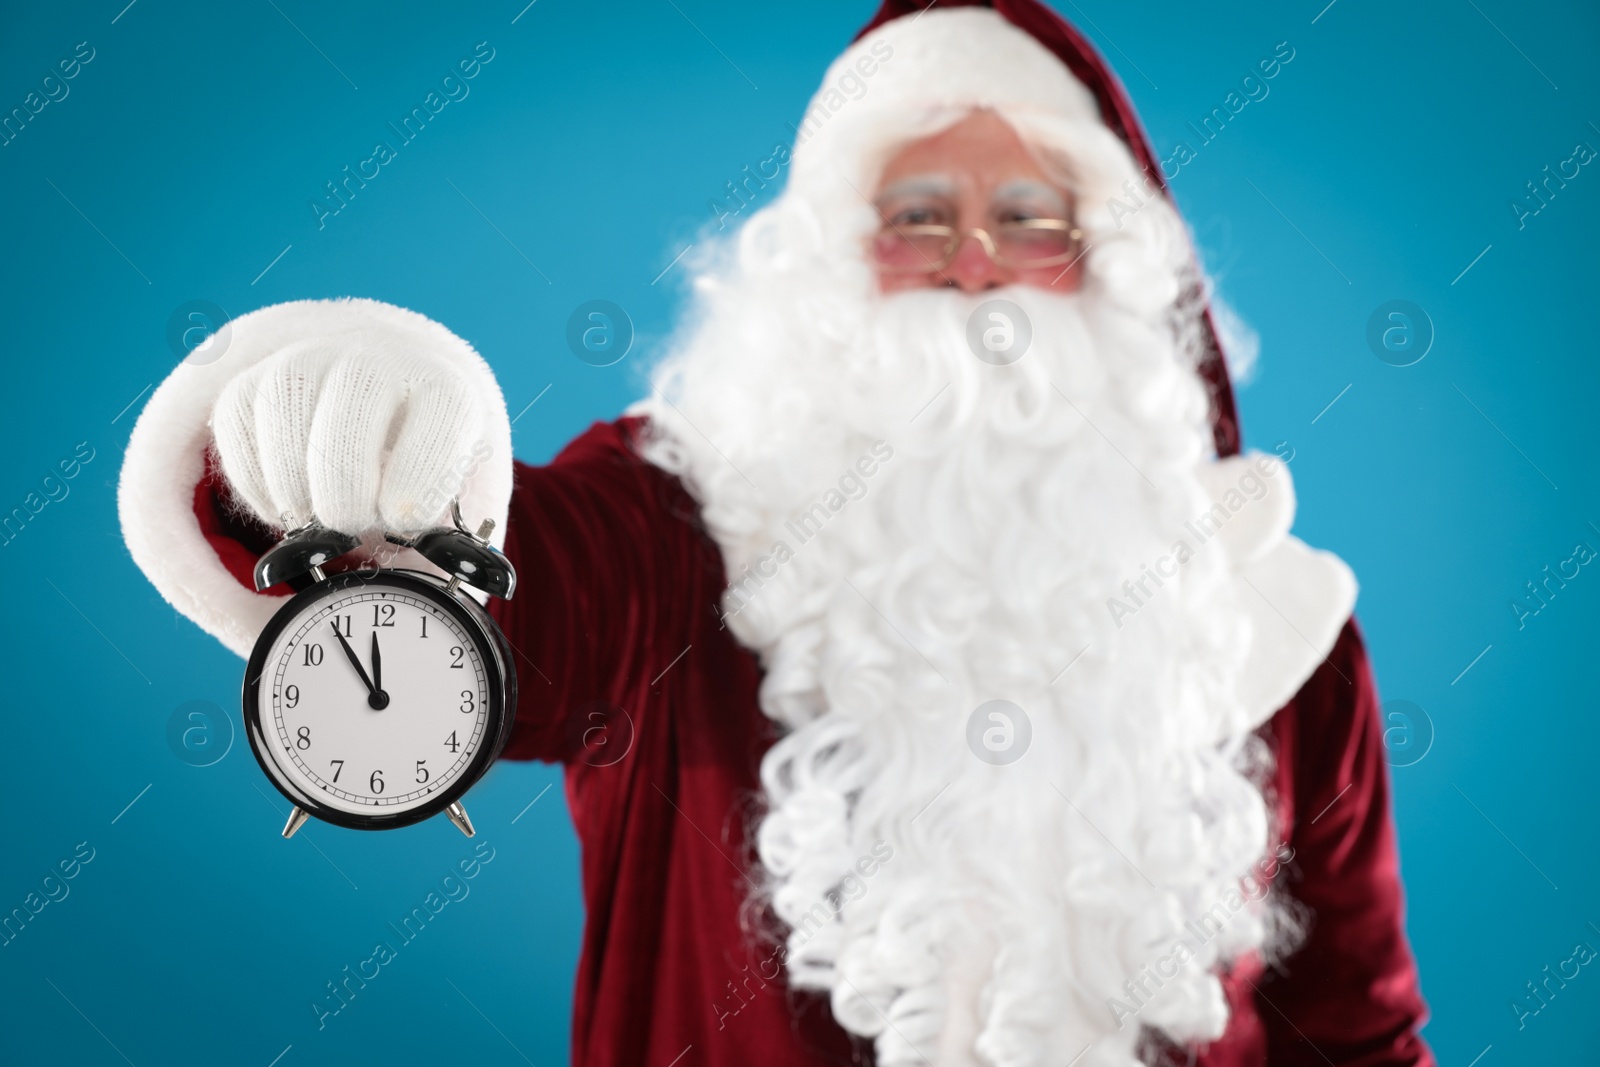 Photo of Santa Claus holding alarm clock on blue background, focus on hand. Christmas countdown